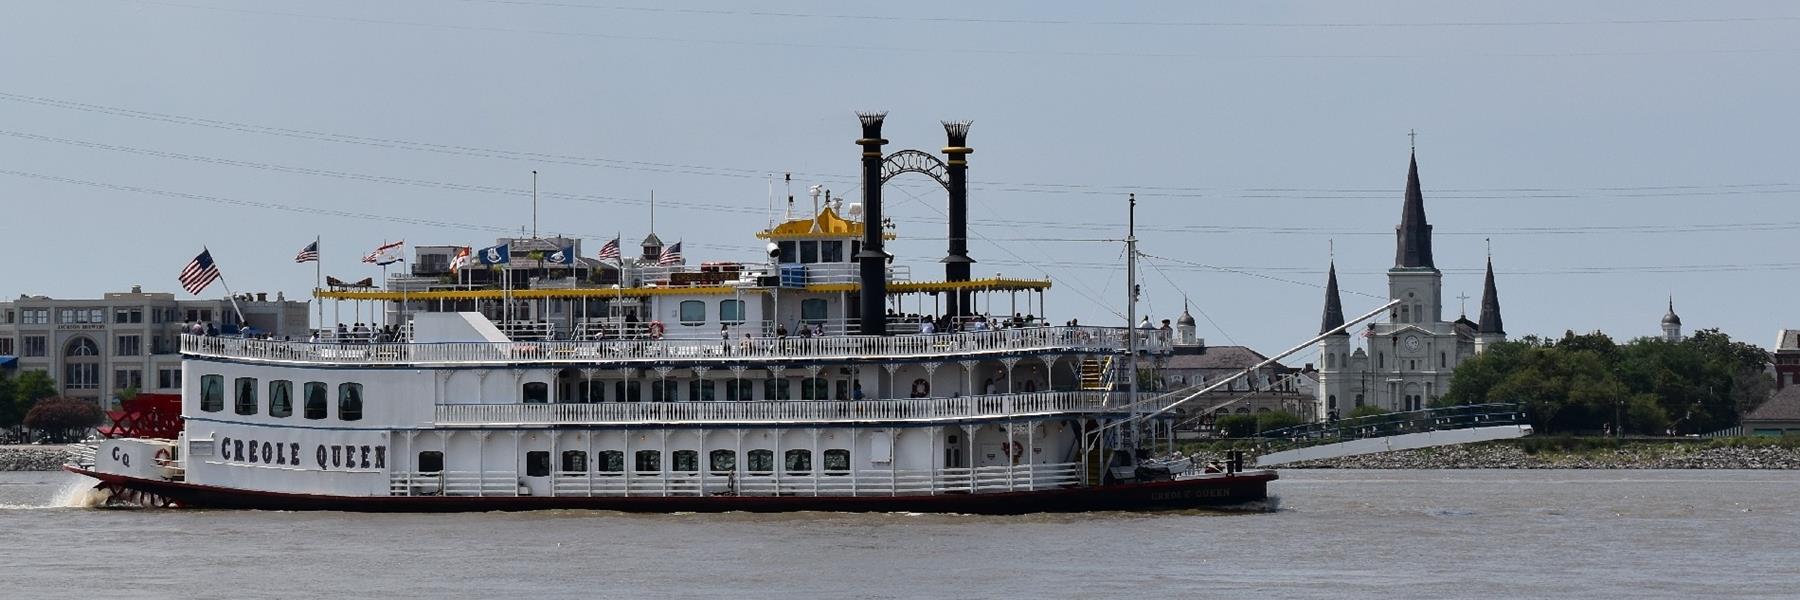 Paddlewheeler Creole Queen in New Orleans, Louisiana